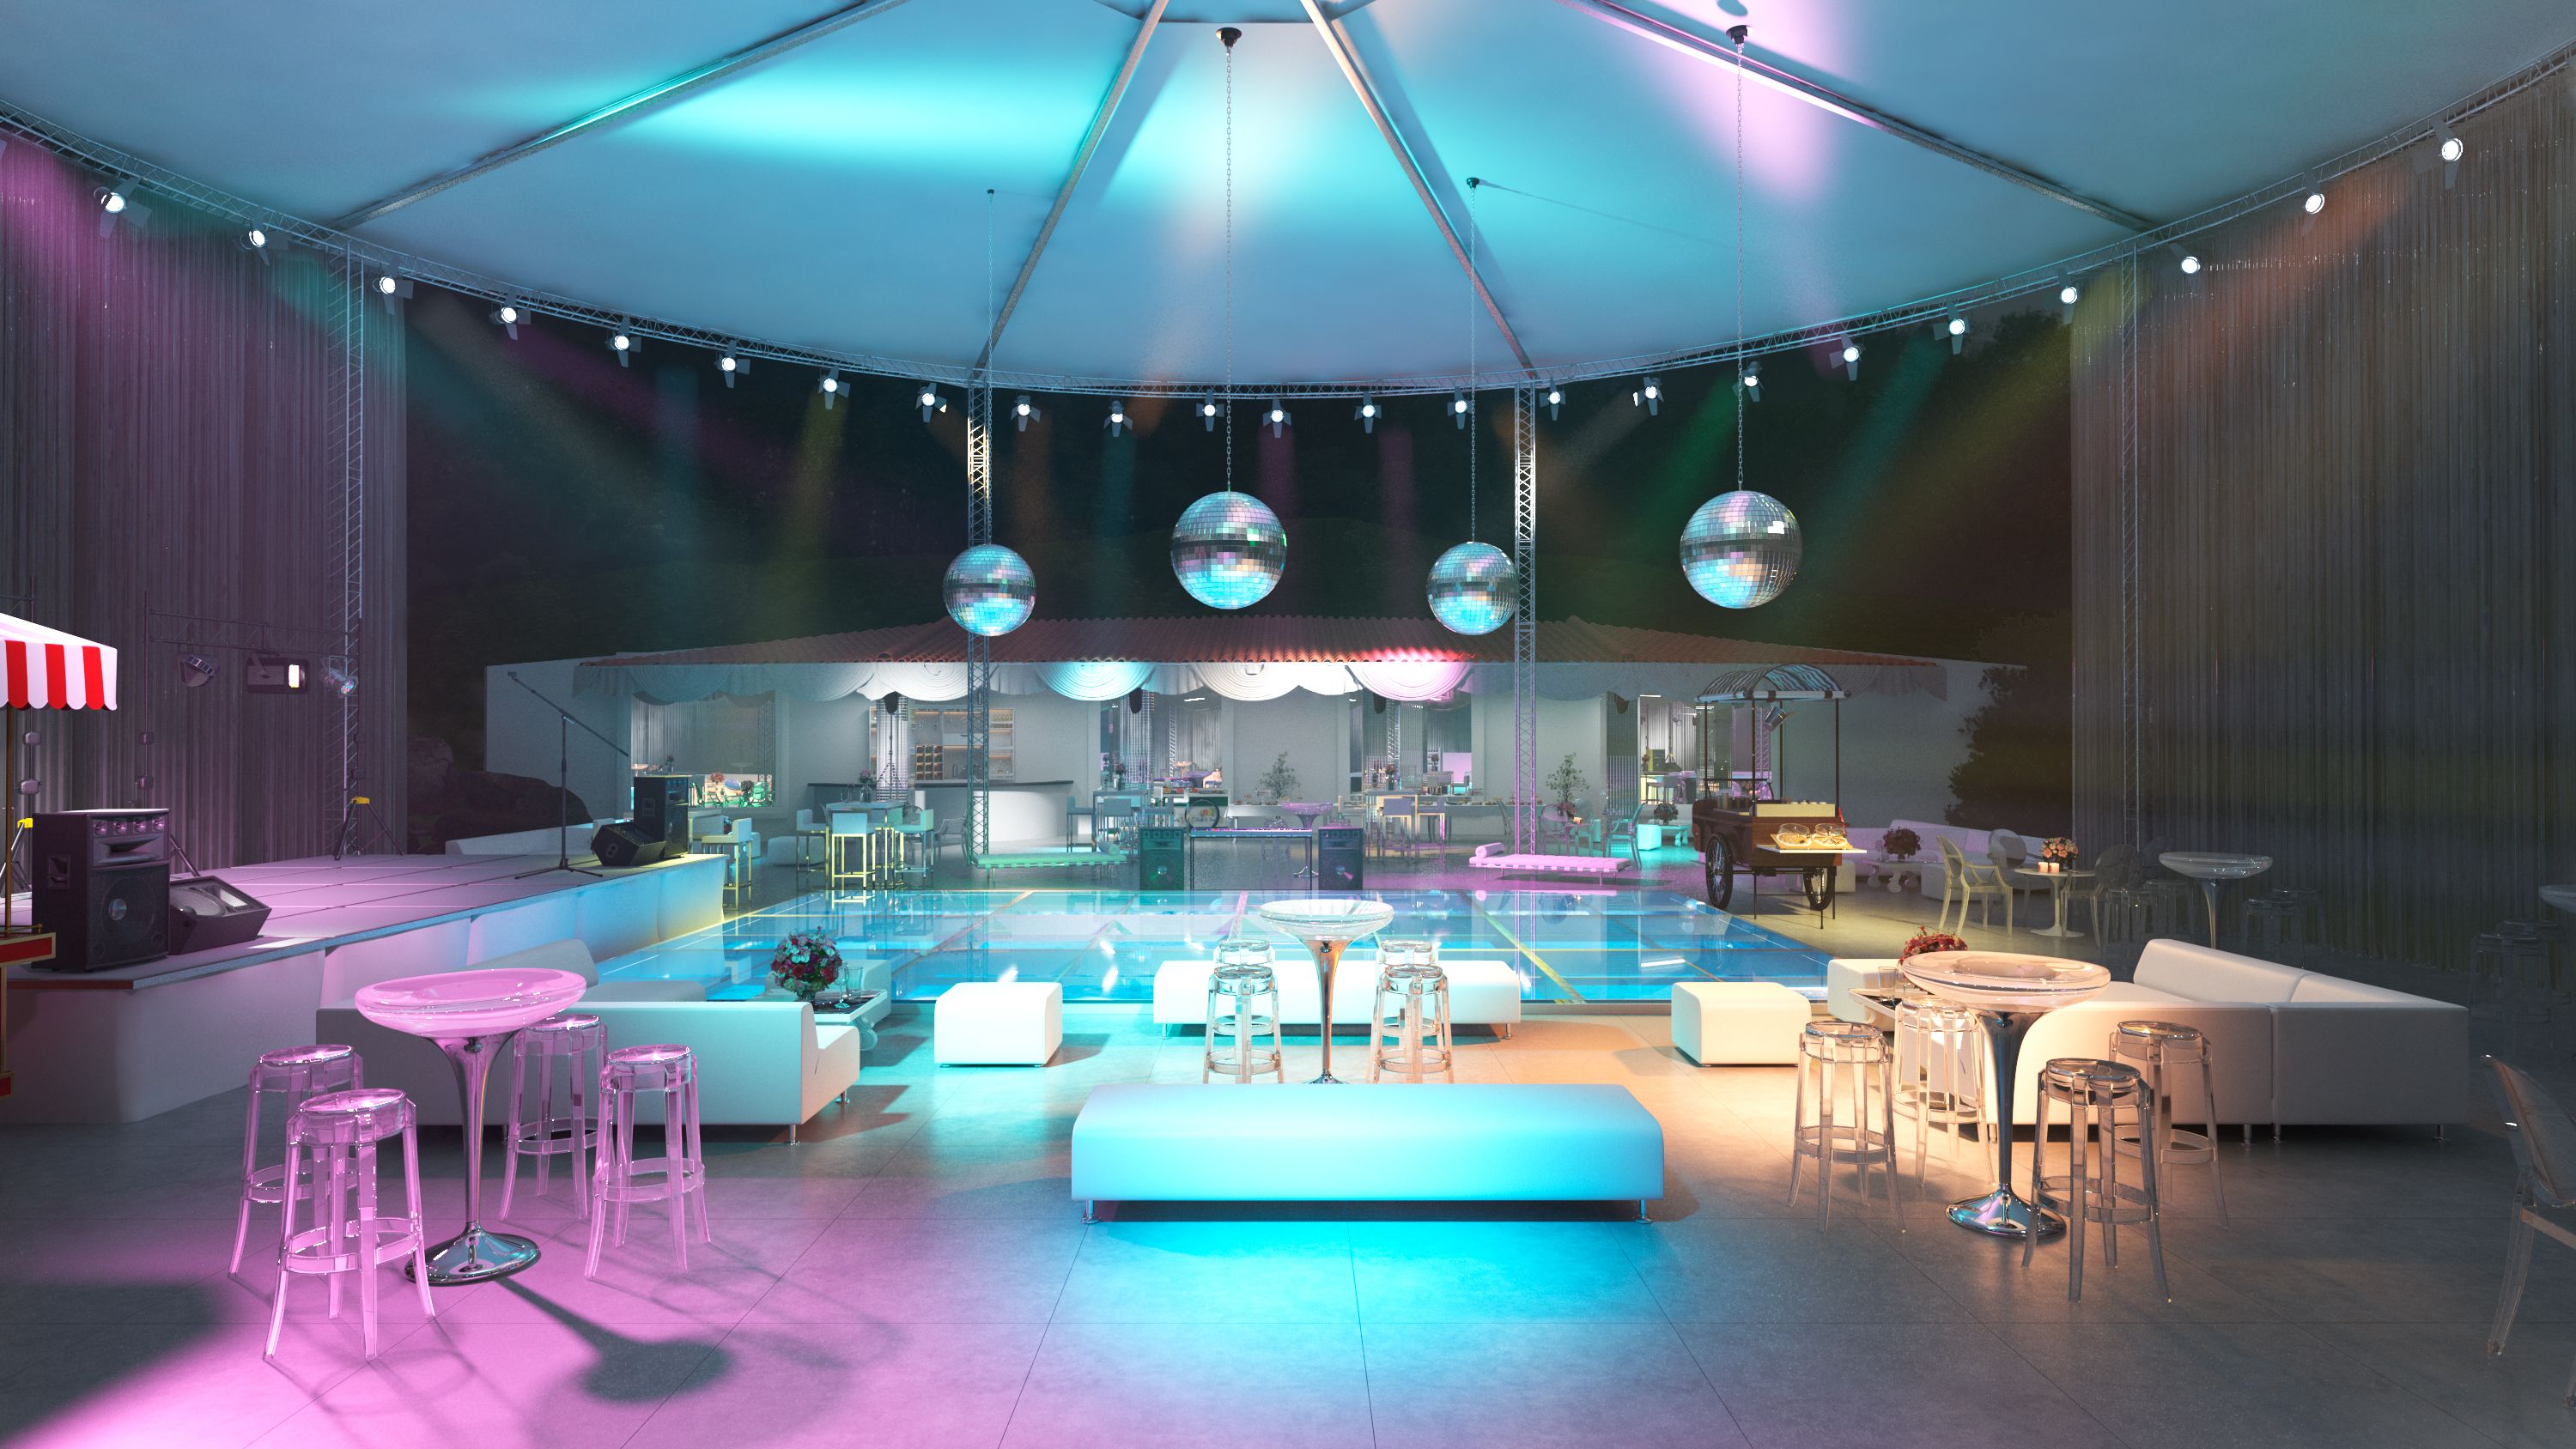 High quality rendering image of wedding dance floor, stage and chill out area with covered pool, bar area, and pendant disco balls for high profile wedding in barcelona